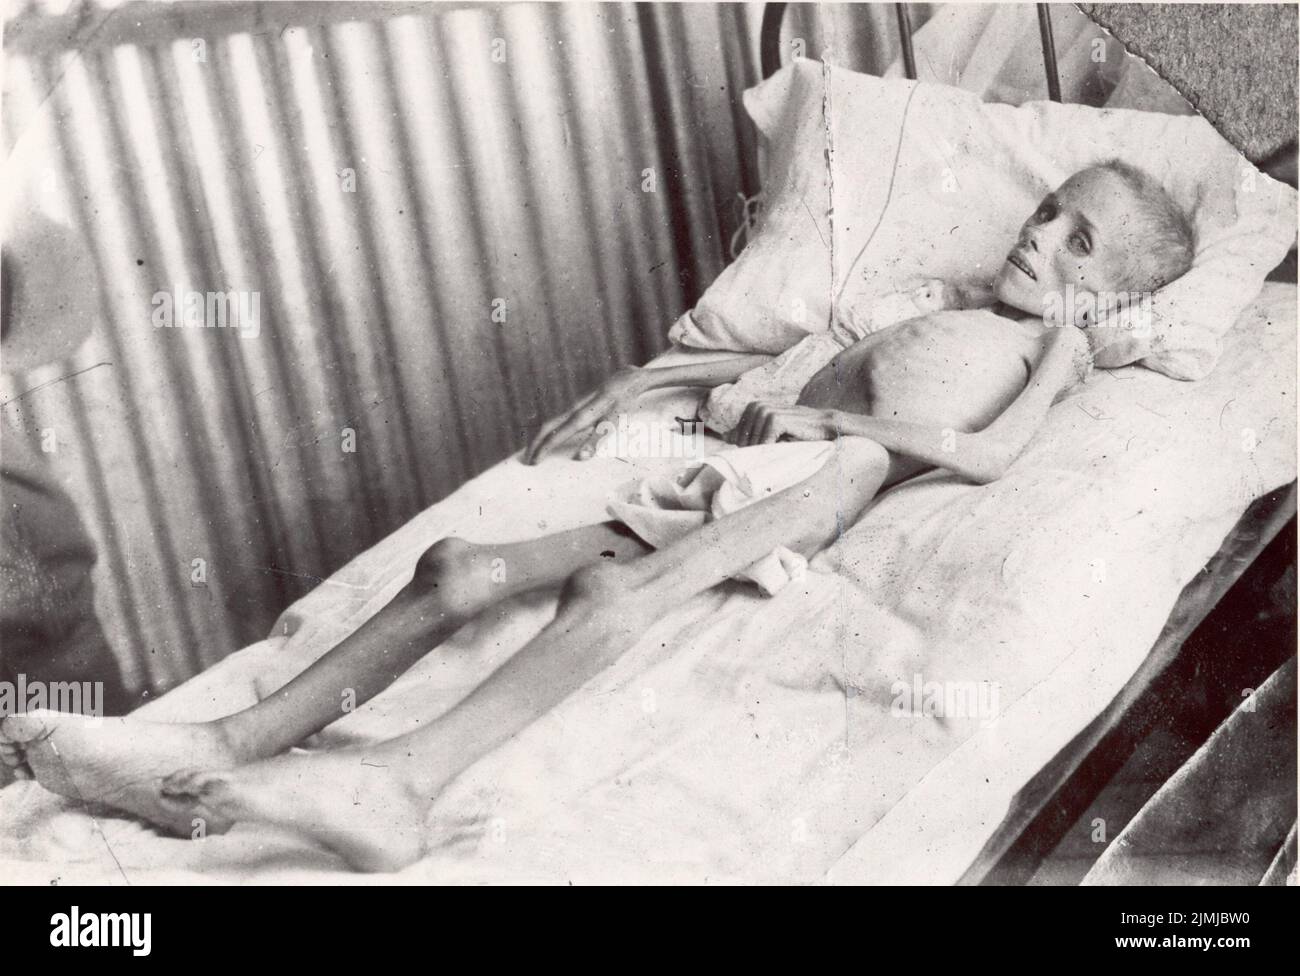 Lizzie van Zyl, a starving Boer child, visited by Emily Hobhouse in a British concentration camp Stock Photo